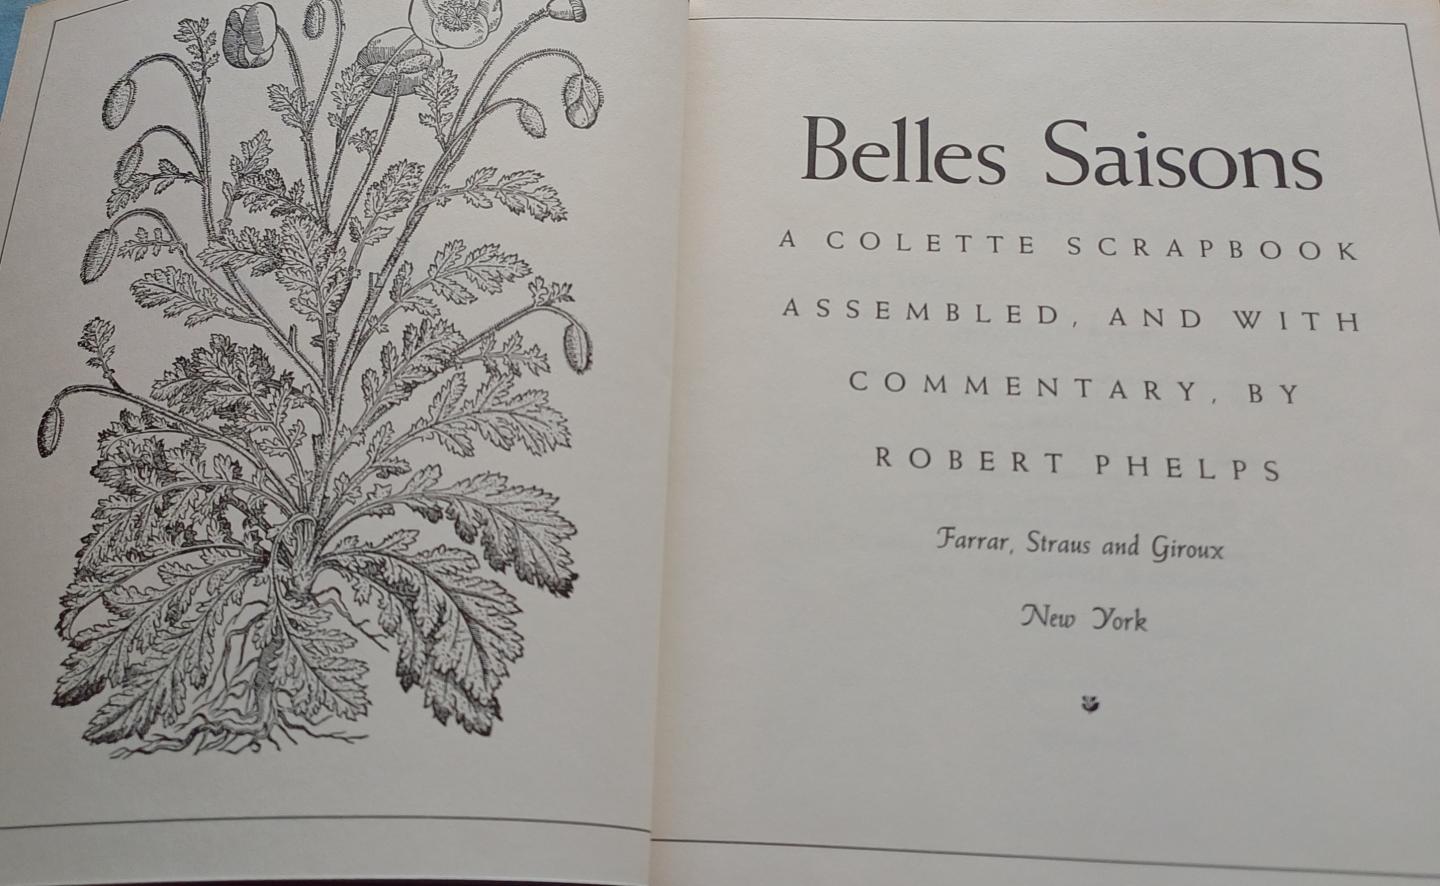 Phelps, Robert (assembled and commentary) - Belles Saisons. A Colette Scrapbook.